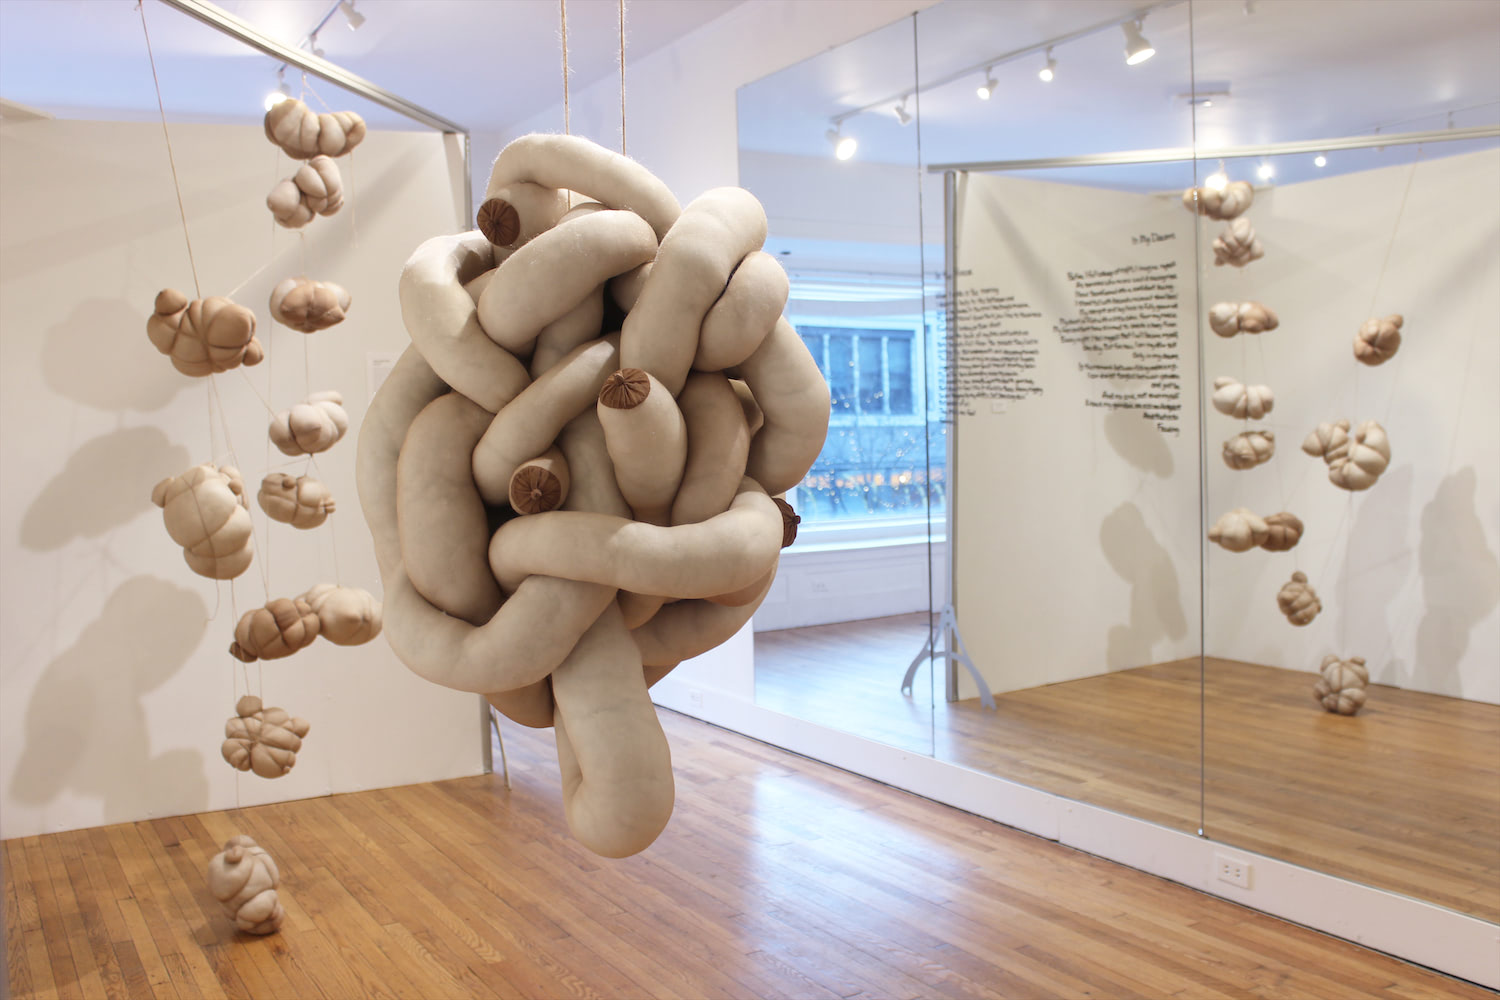 This image shows the whole installation, which includes two soft sculptures, a large mirror mounted on the wall opposite to the sculptures, and two poems written on the mirror.